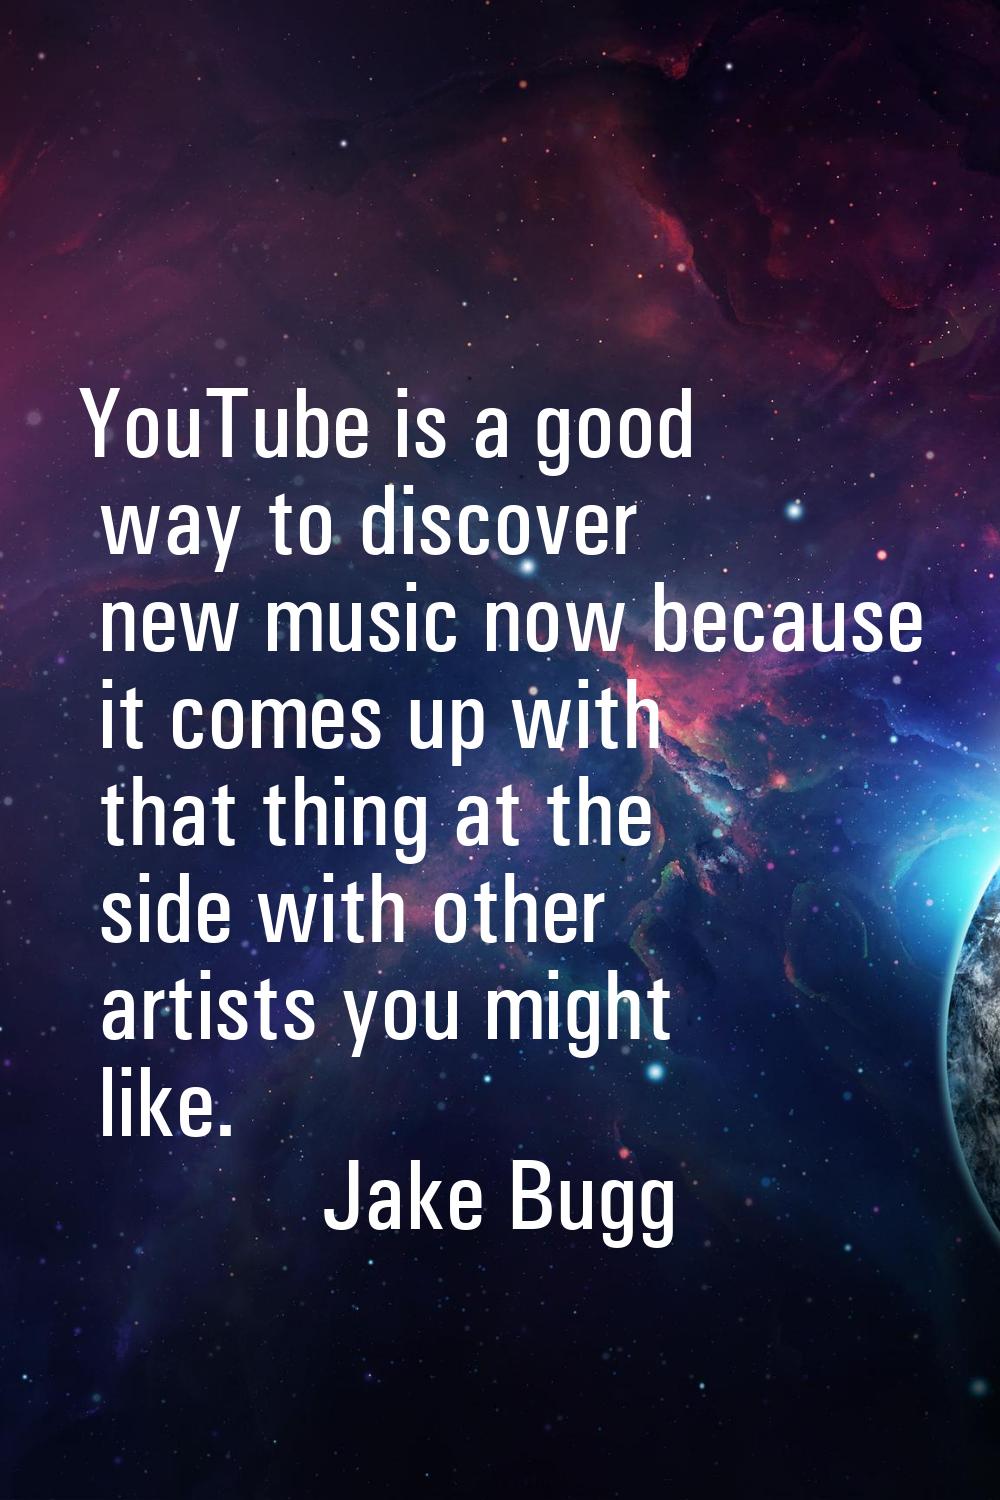 YouTube is a good way to discover new music now because it comes up with that thing at the side wit